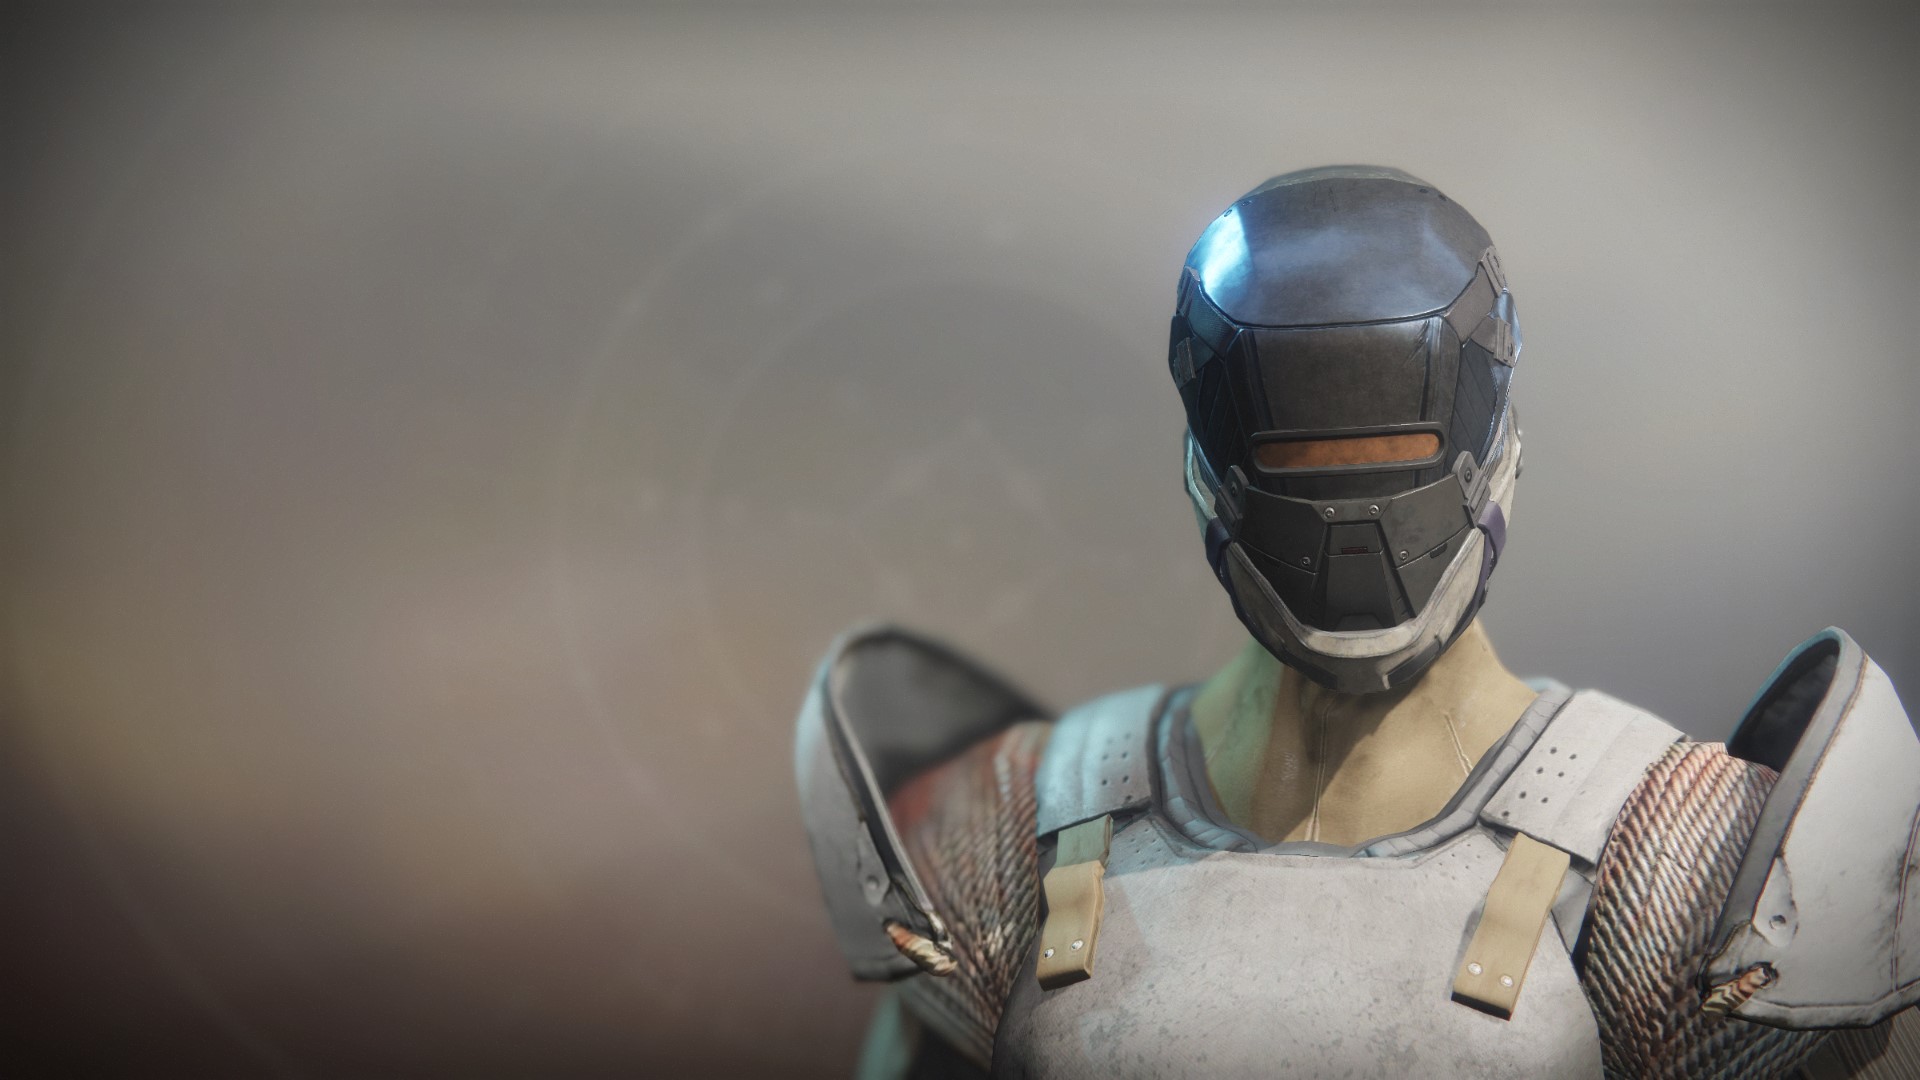 An in-game render of the Intrepid Exploit Helm.